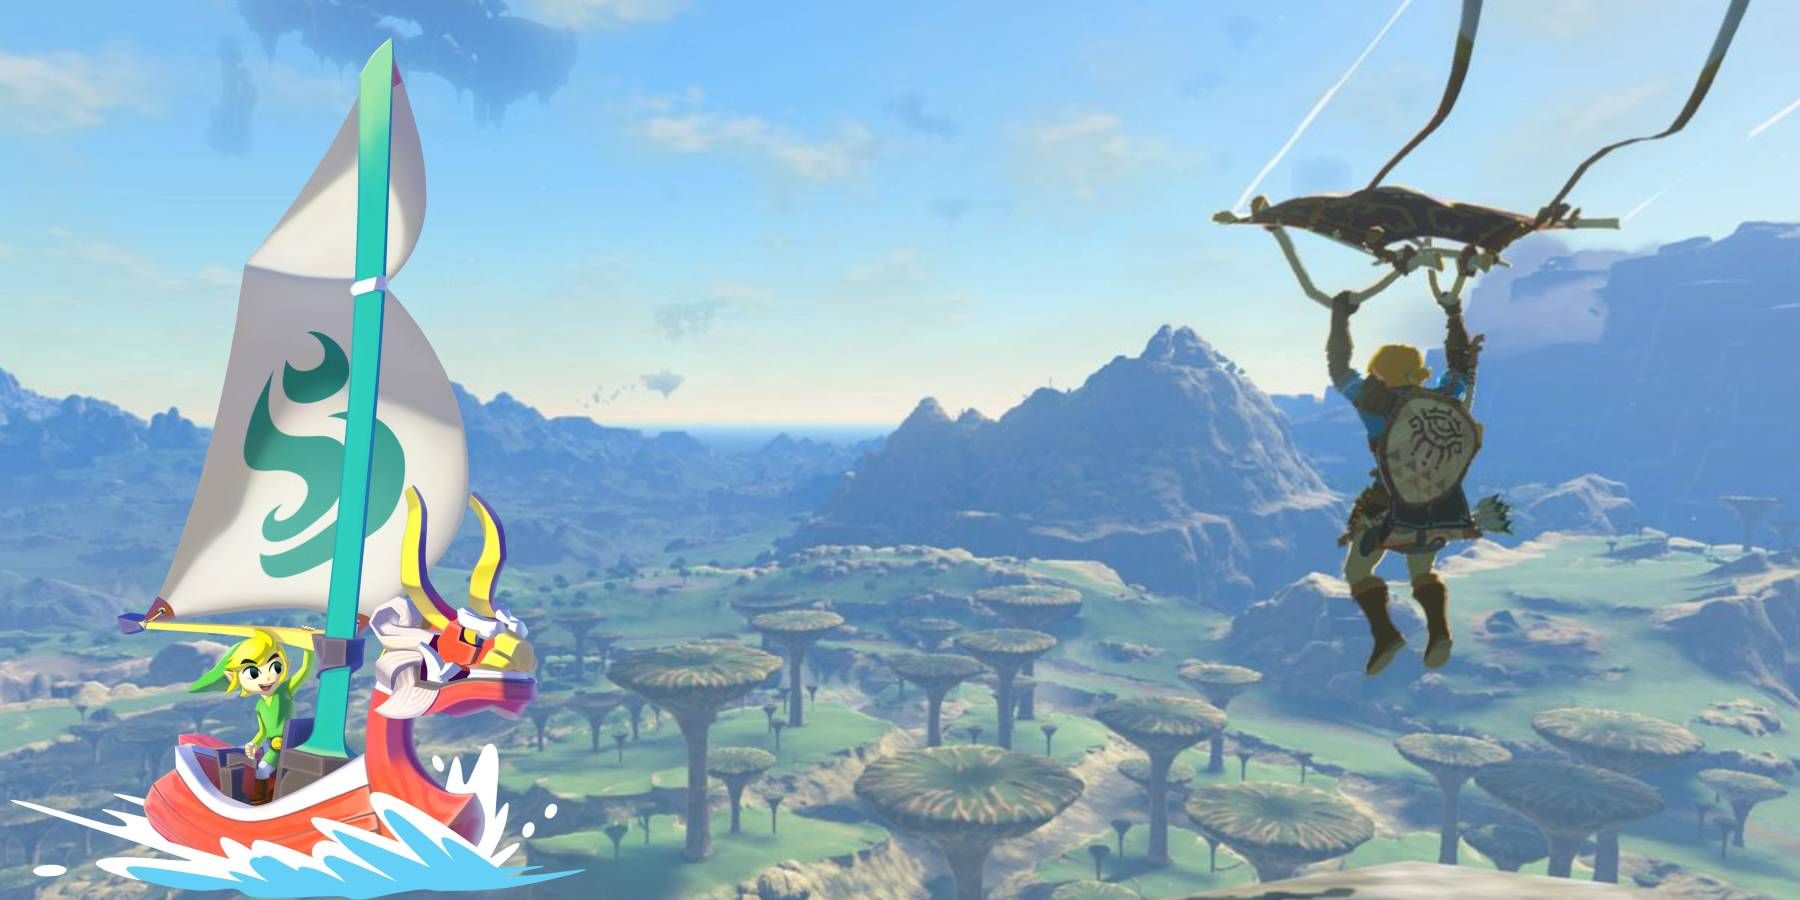 Link gliding in The Legend of Zelda: Tears of the Kingdom while Link from Wind Waker sails by